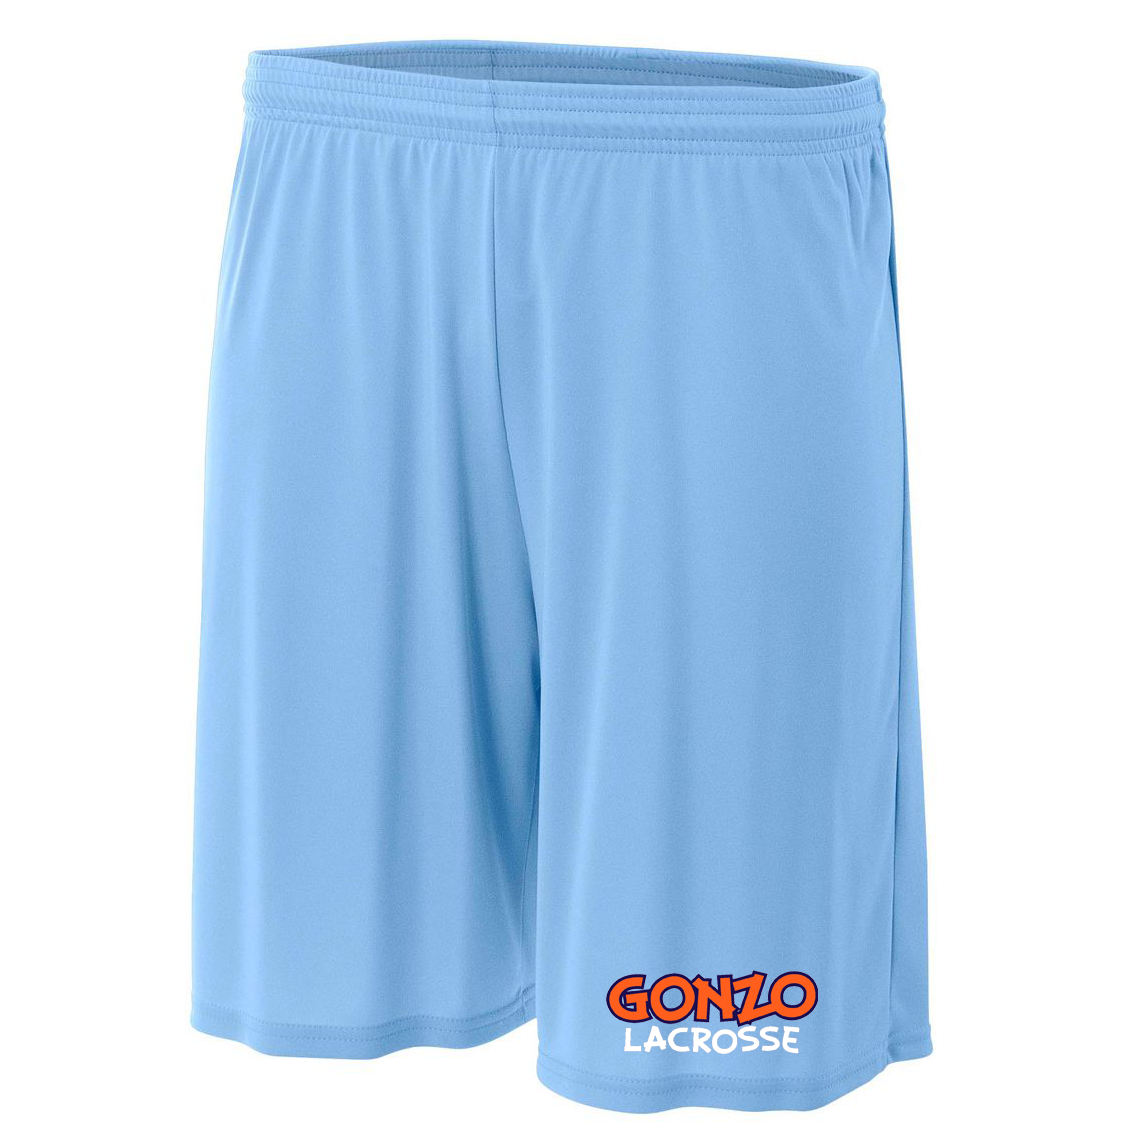 Gonzo Lacrosse Cooling 7" Performance Shorts